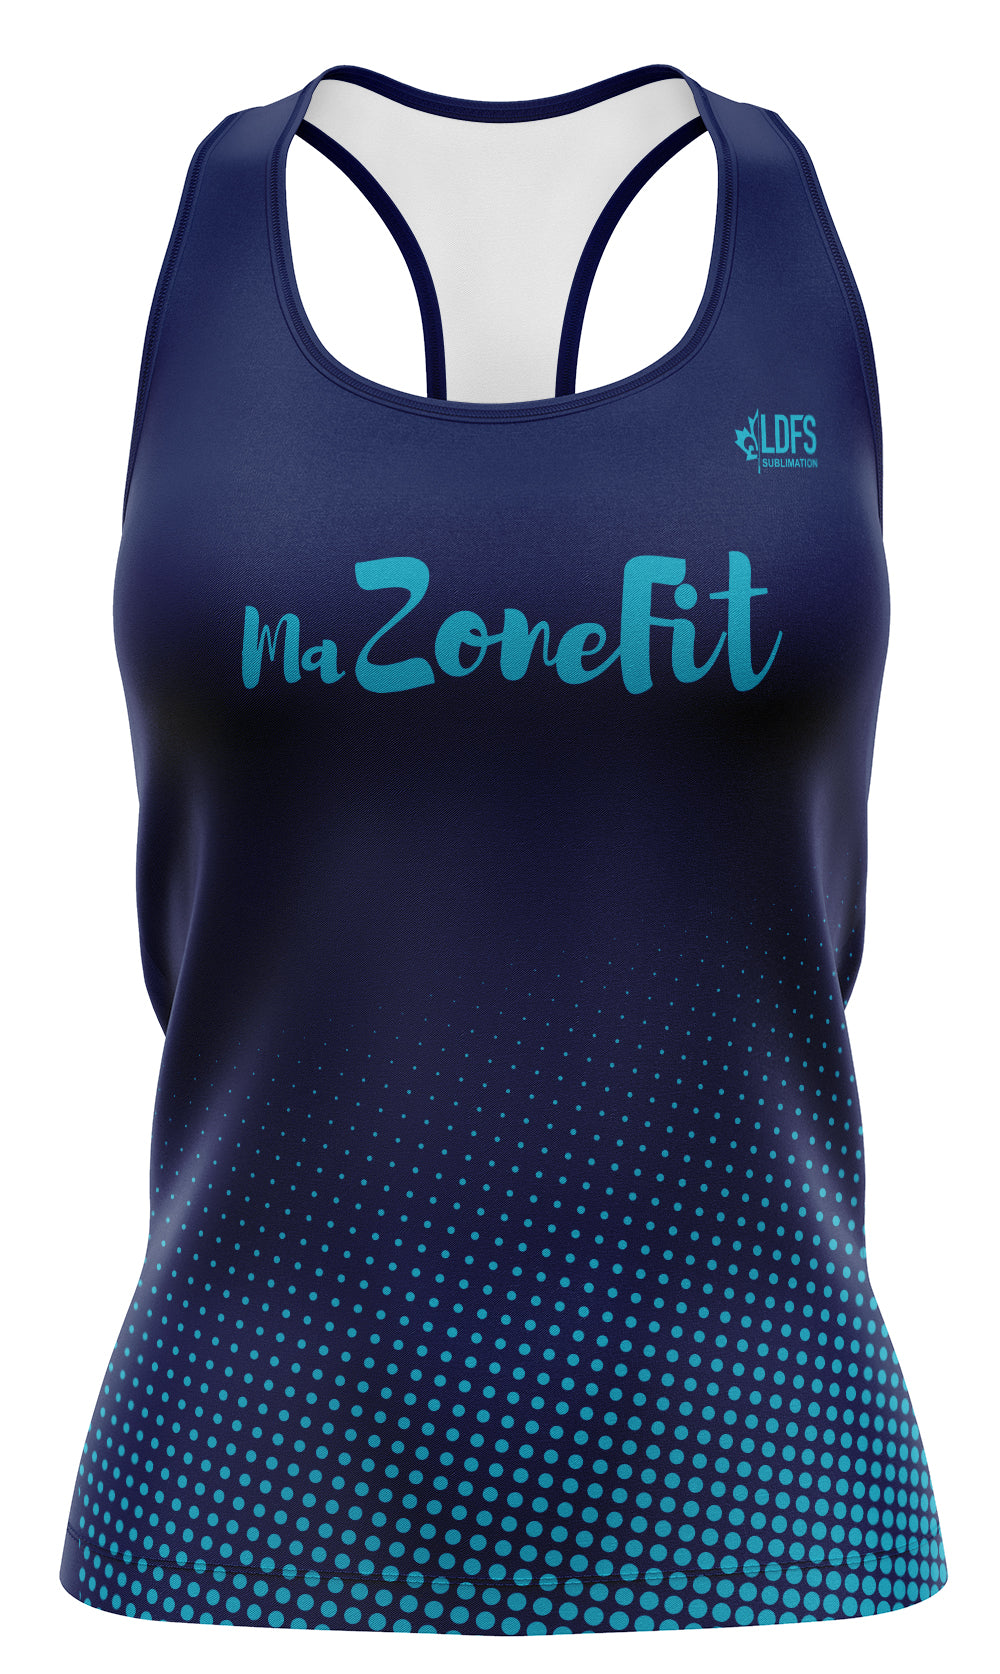 Camisole femme SPORTIVE- Ma Zone Fit – LDFS sublimation